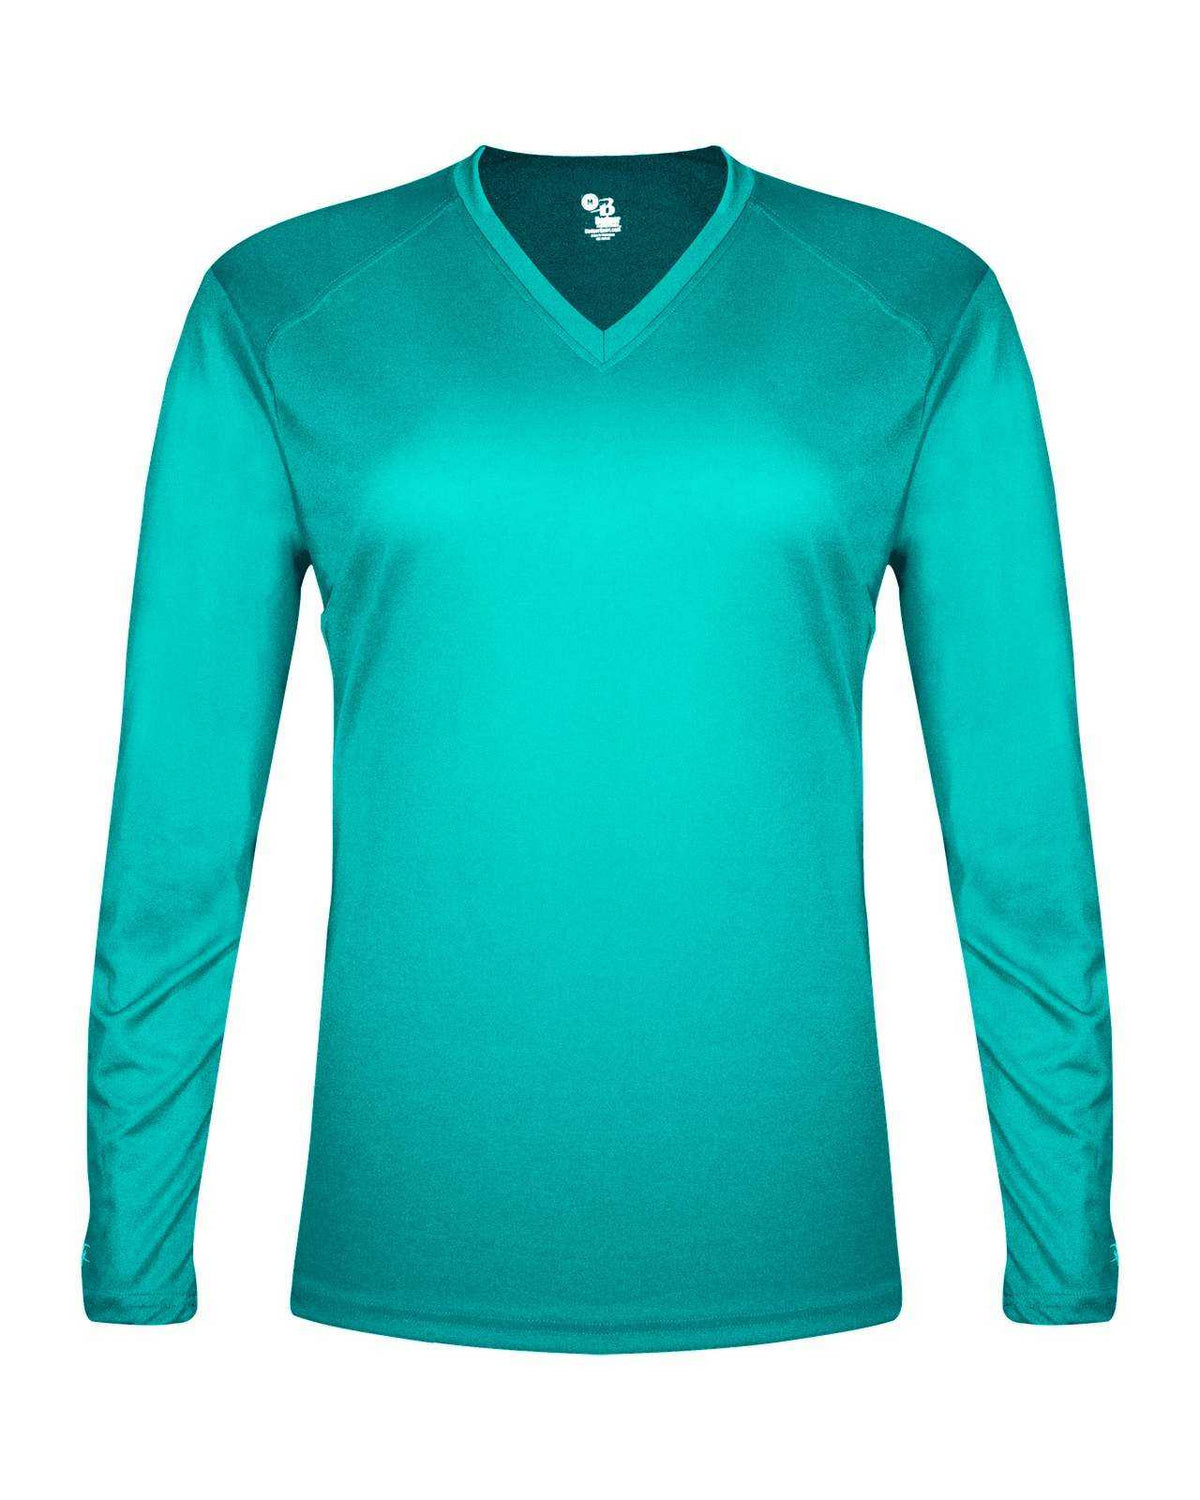 Badger Sport 4964 Tri-Blend L/S Ladies Tee - Turquoise - HIT a Double - 1